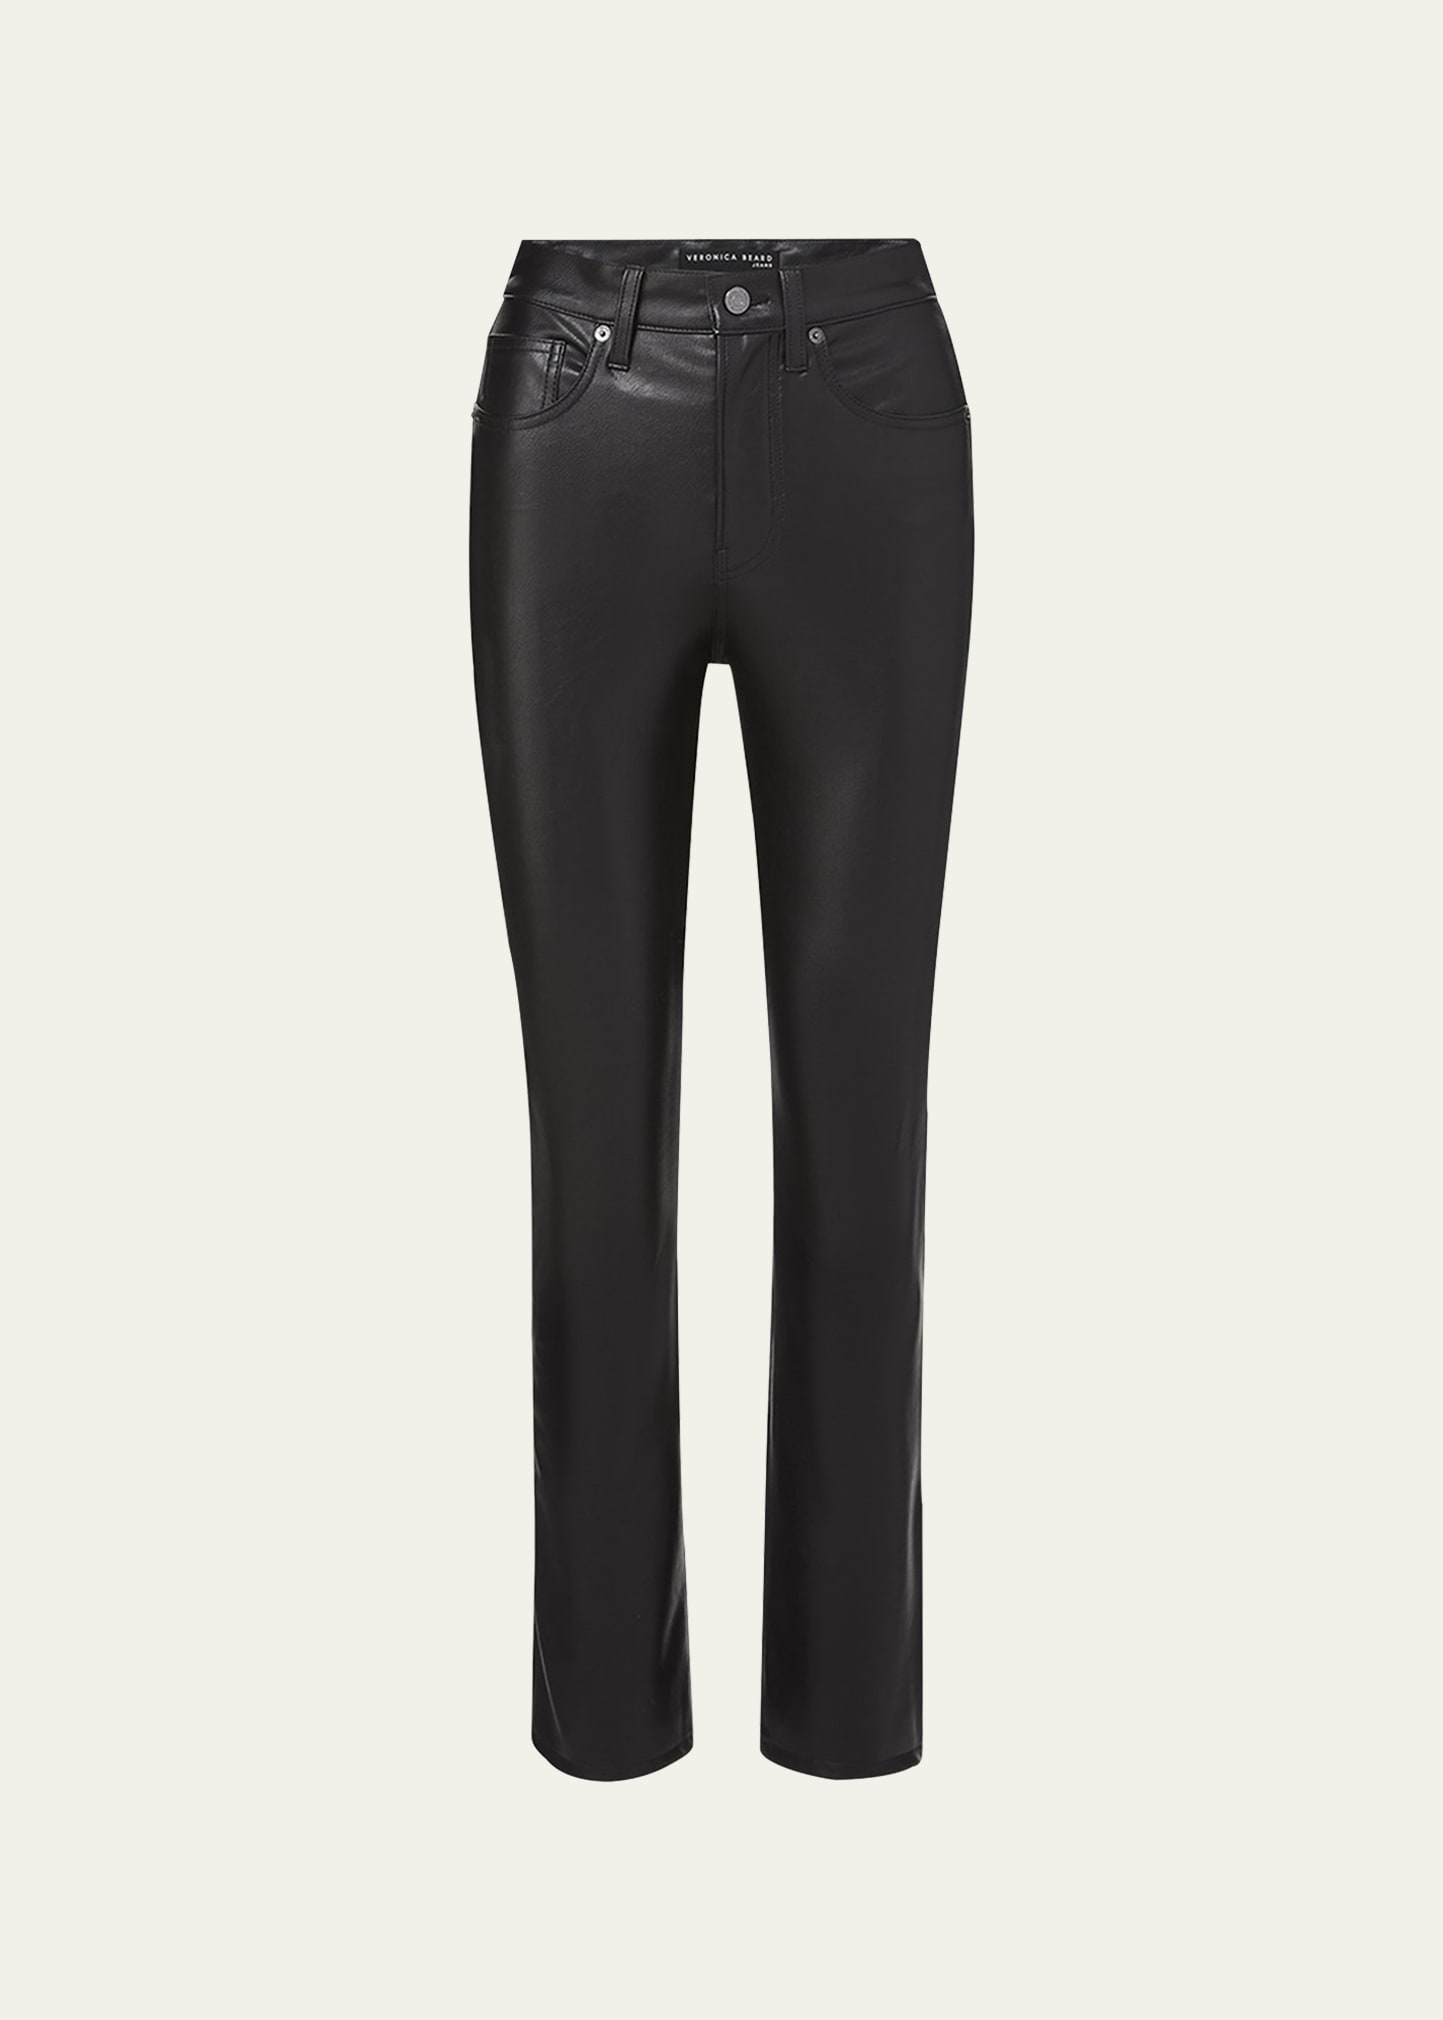 VERONICA BEARD CARLY VEGAN LEATHER KICK-FLARE CROPPED JEANS